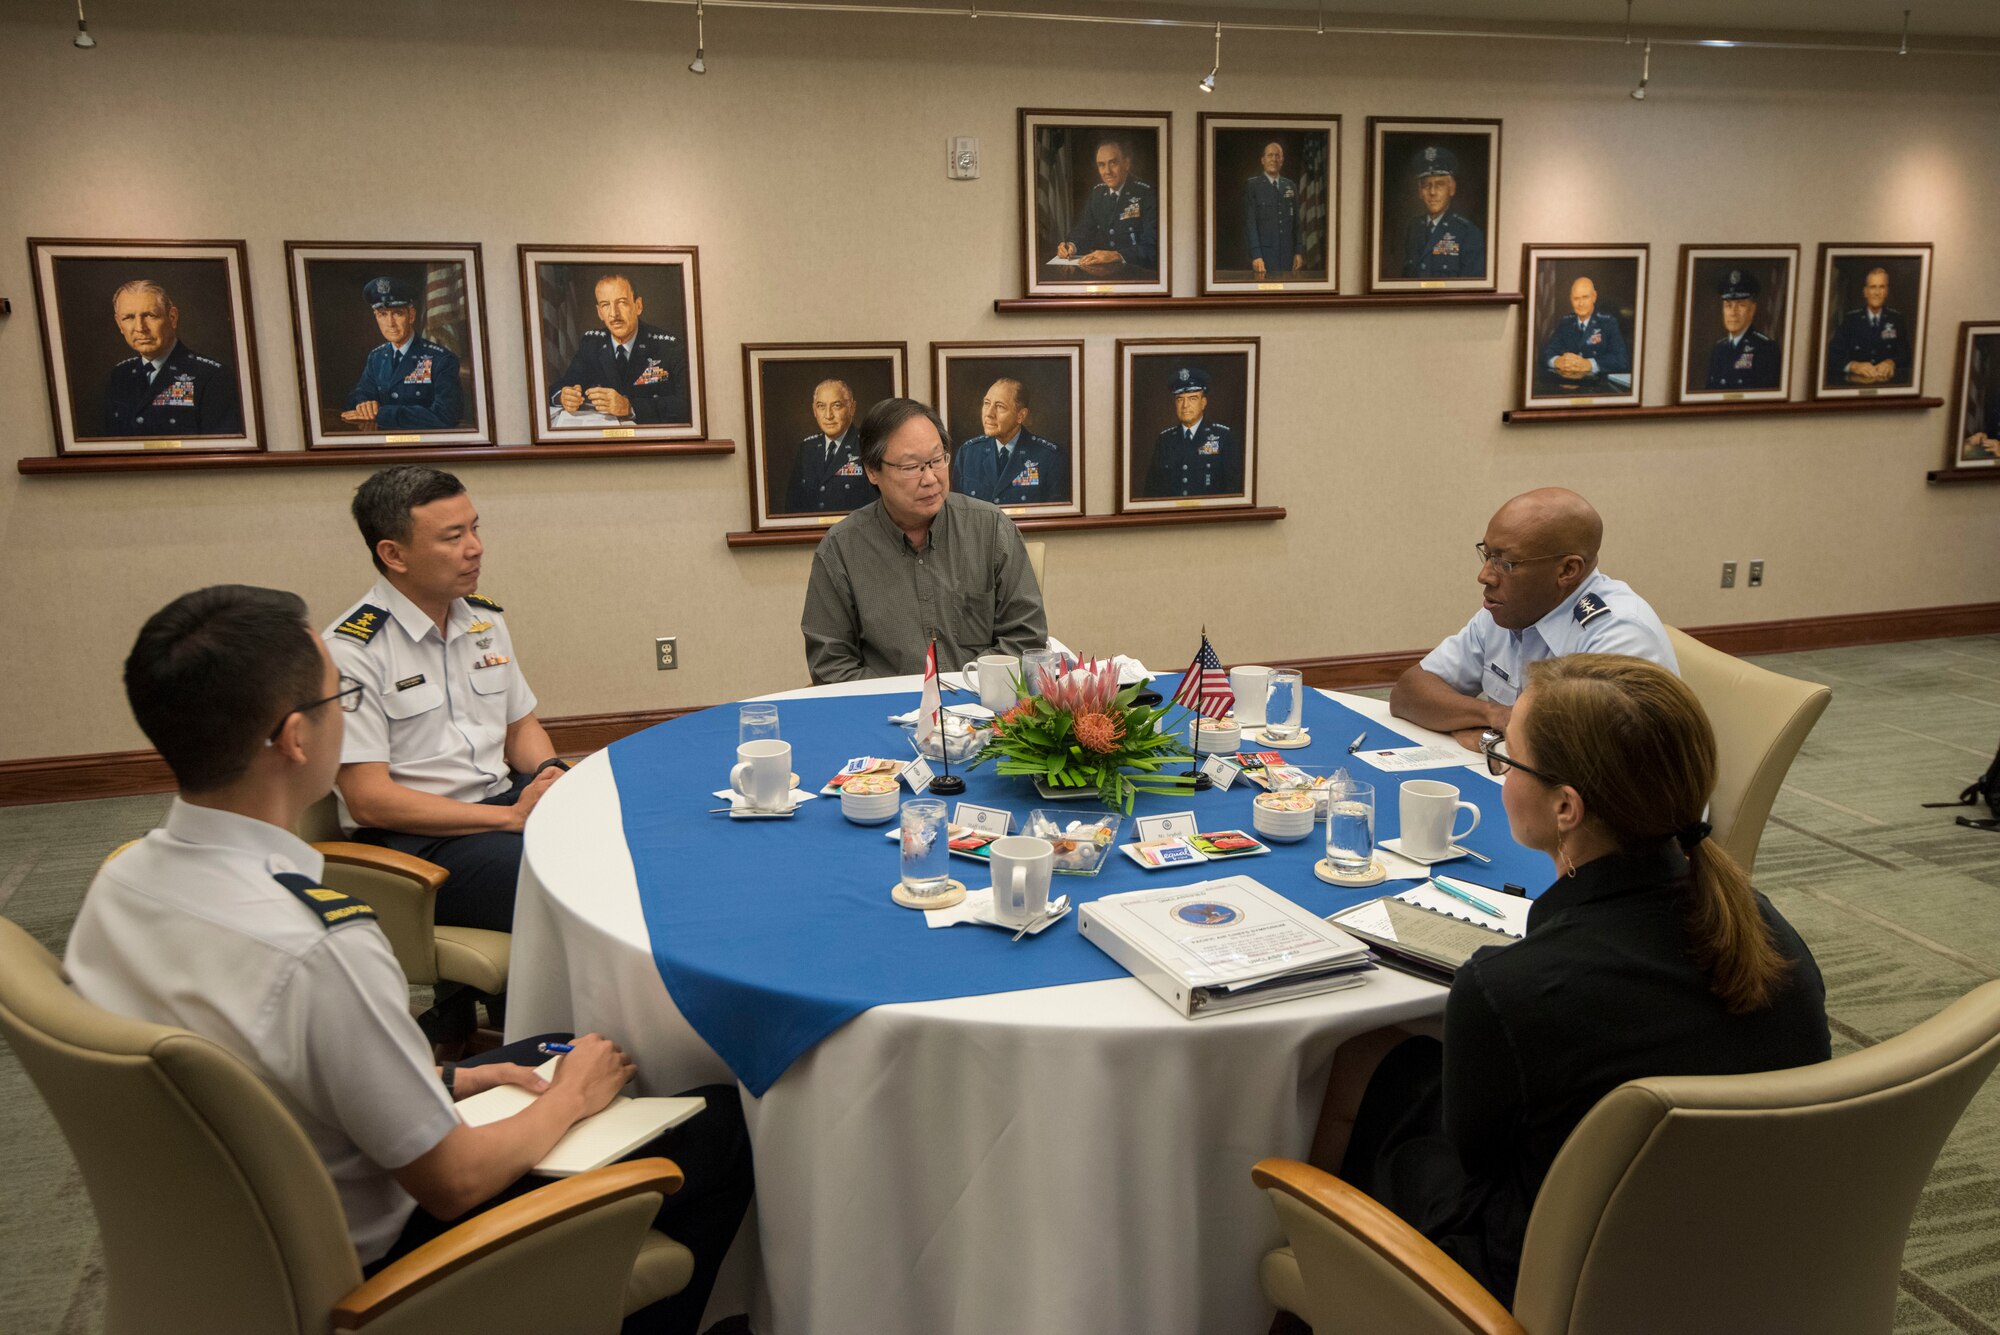 Gen. CQ Brown, Jr., Pacific Air Forces commander, conducts bilateral discussions with Maj. Gen. Kelvin Boon Leong Khong, Chief of Air Force, Republic of Singapore Air Force, Brian Woo, PACAF foreign policy adviser, and Kelli Seybolt, deputy under secretary of the Air Force for international affairs during the 2019 Pacific Air Chiefs Symposium at Joint Base Pearl Harbor-Hickam, Hawaii, Dec. 5, 2019.